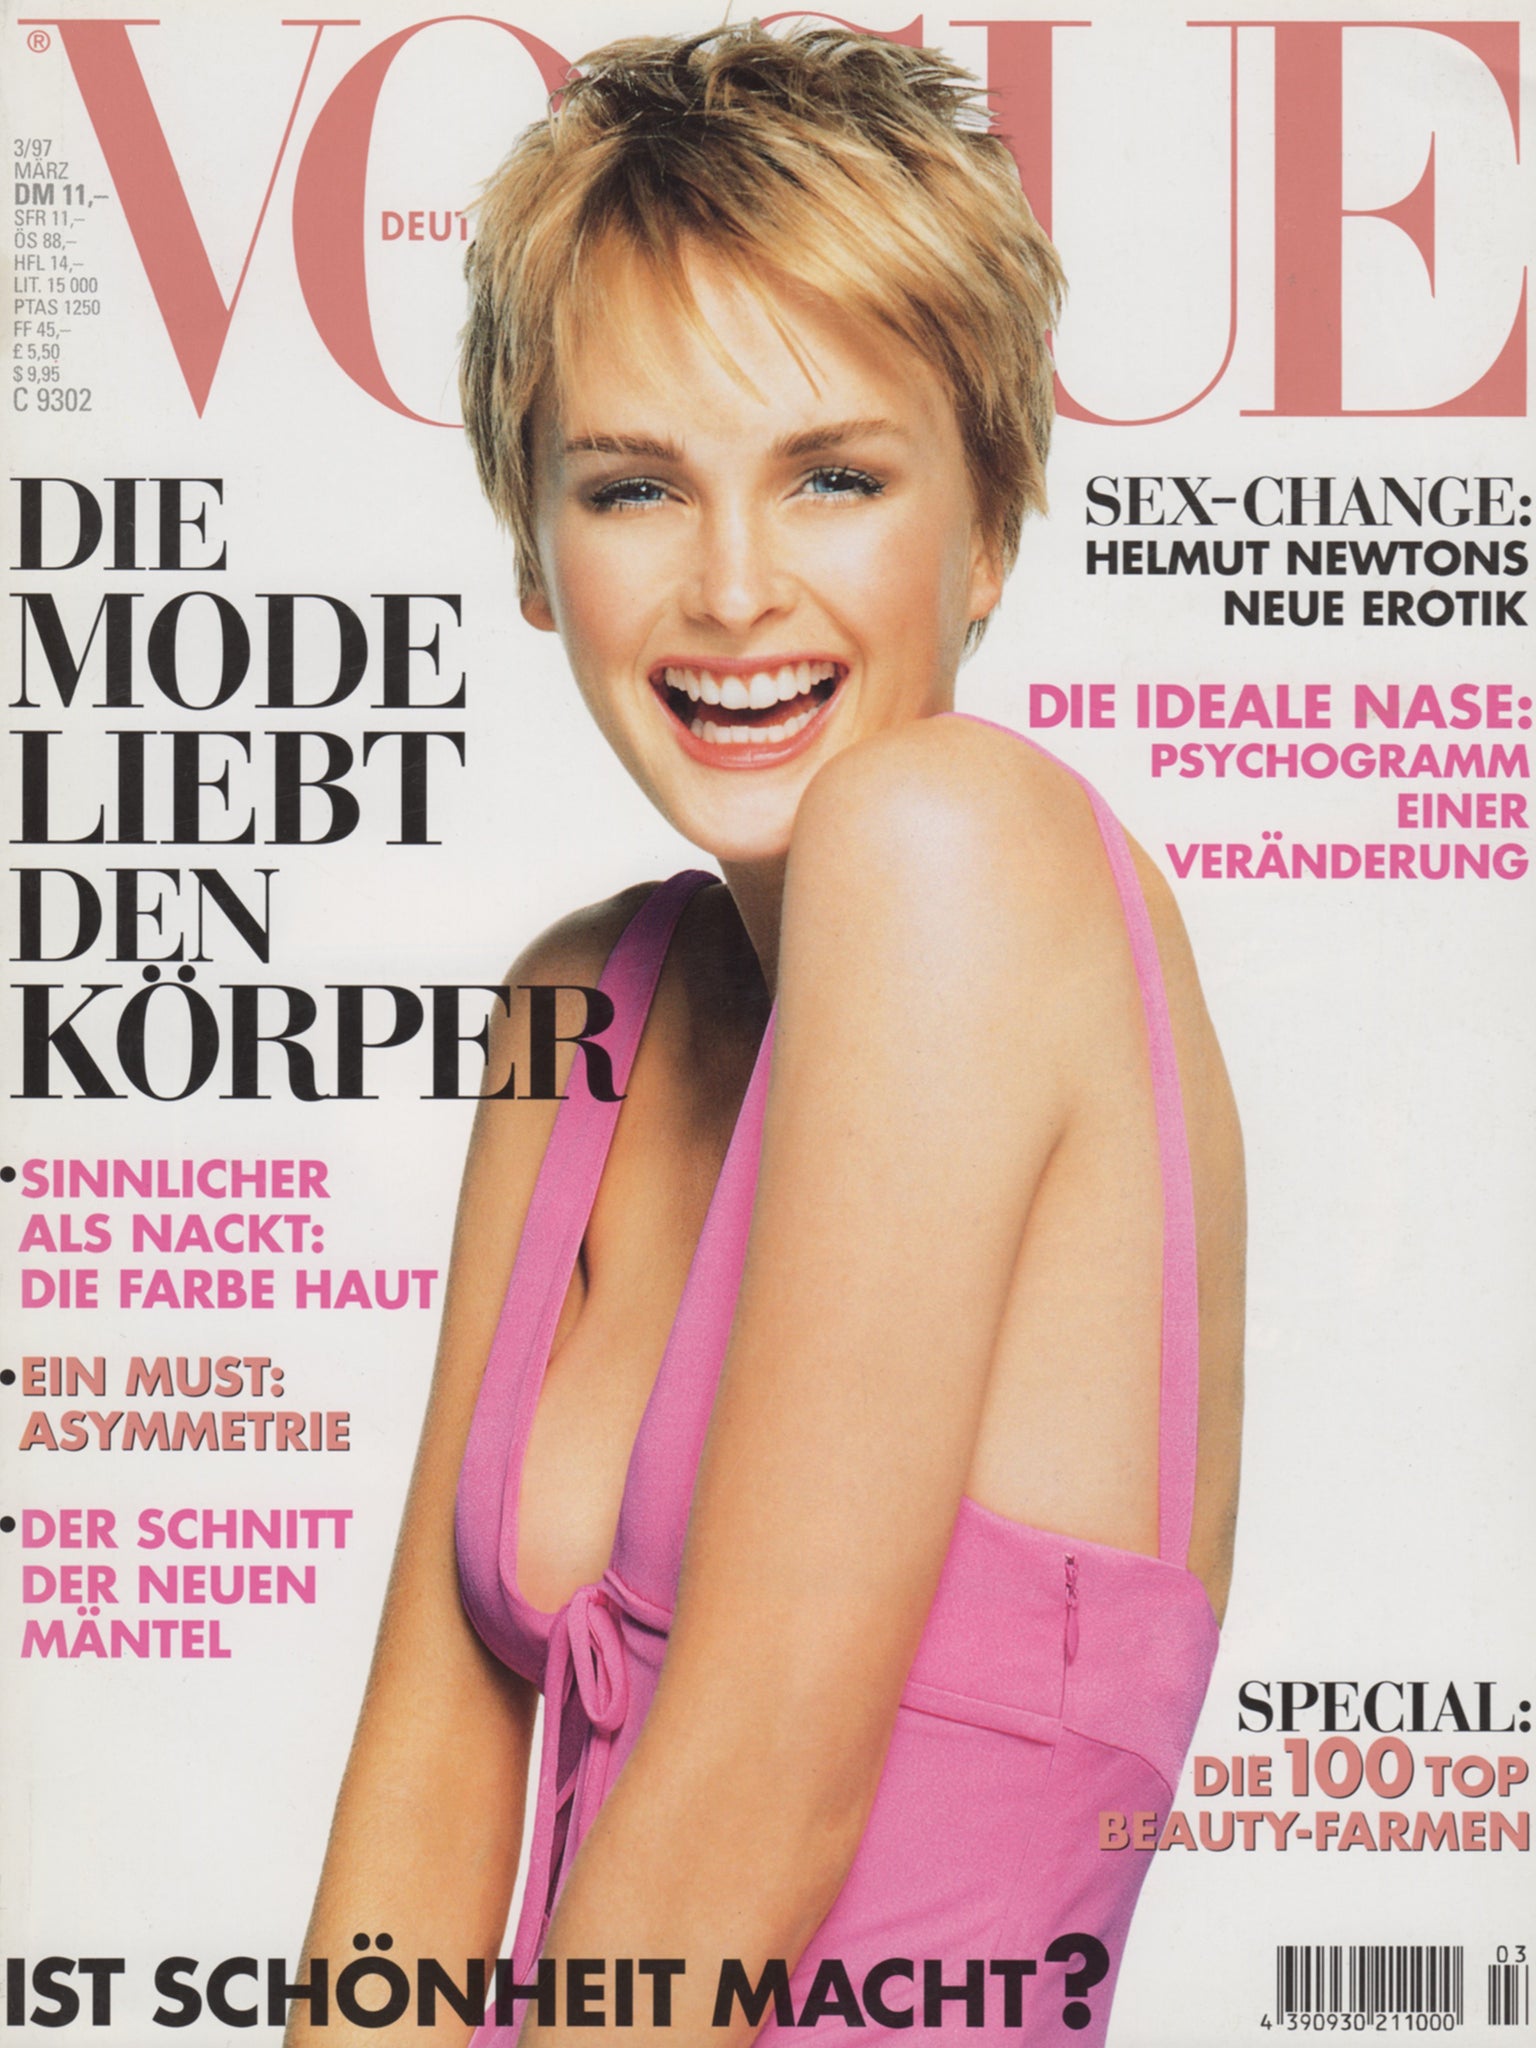 VOGUE GERMANY March 1997